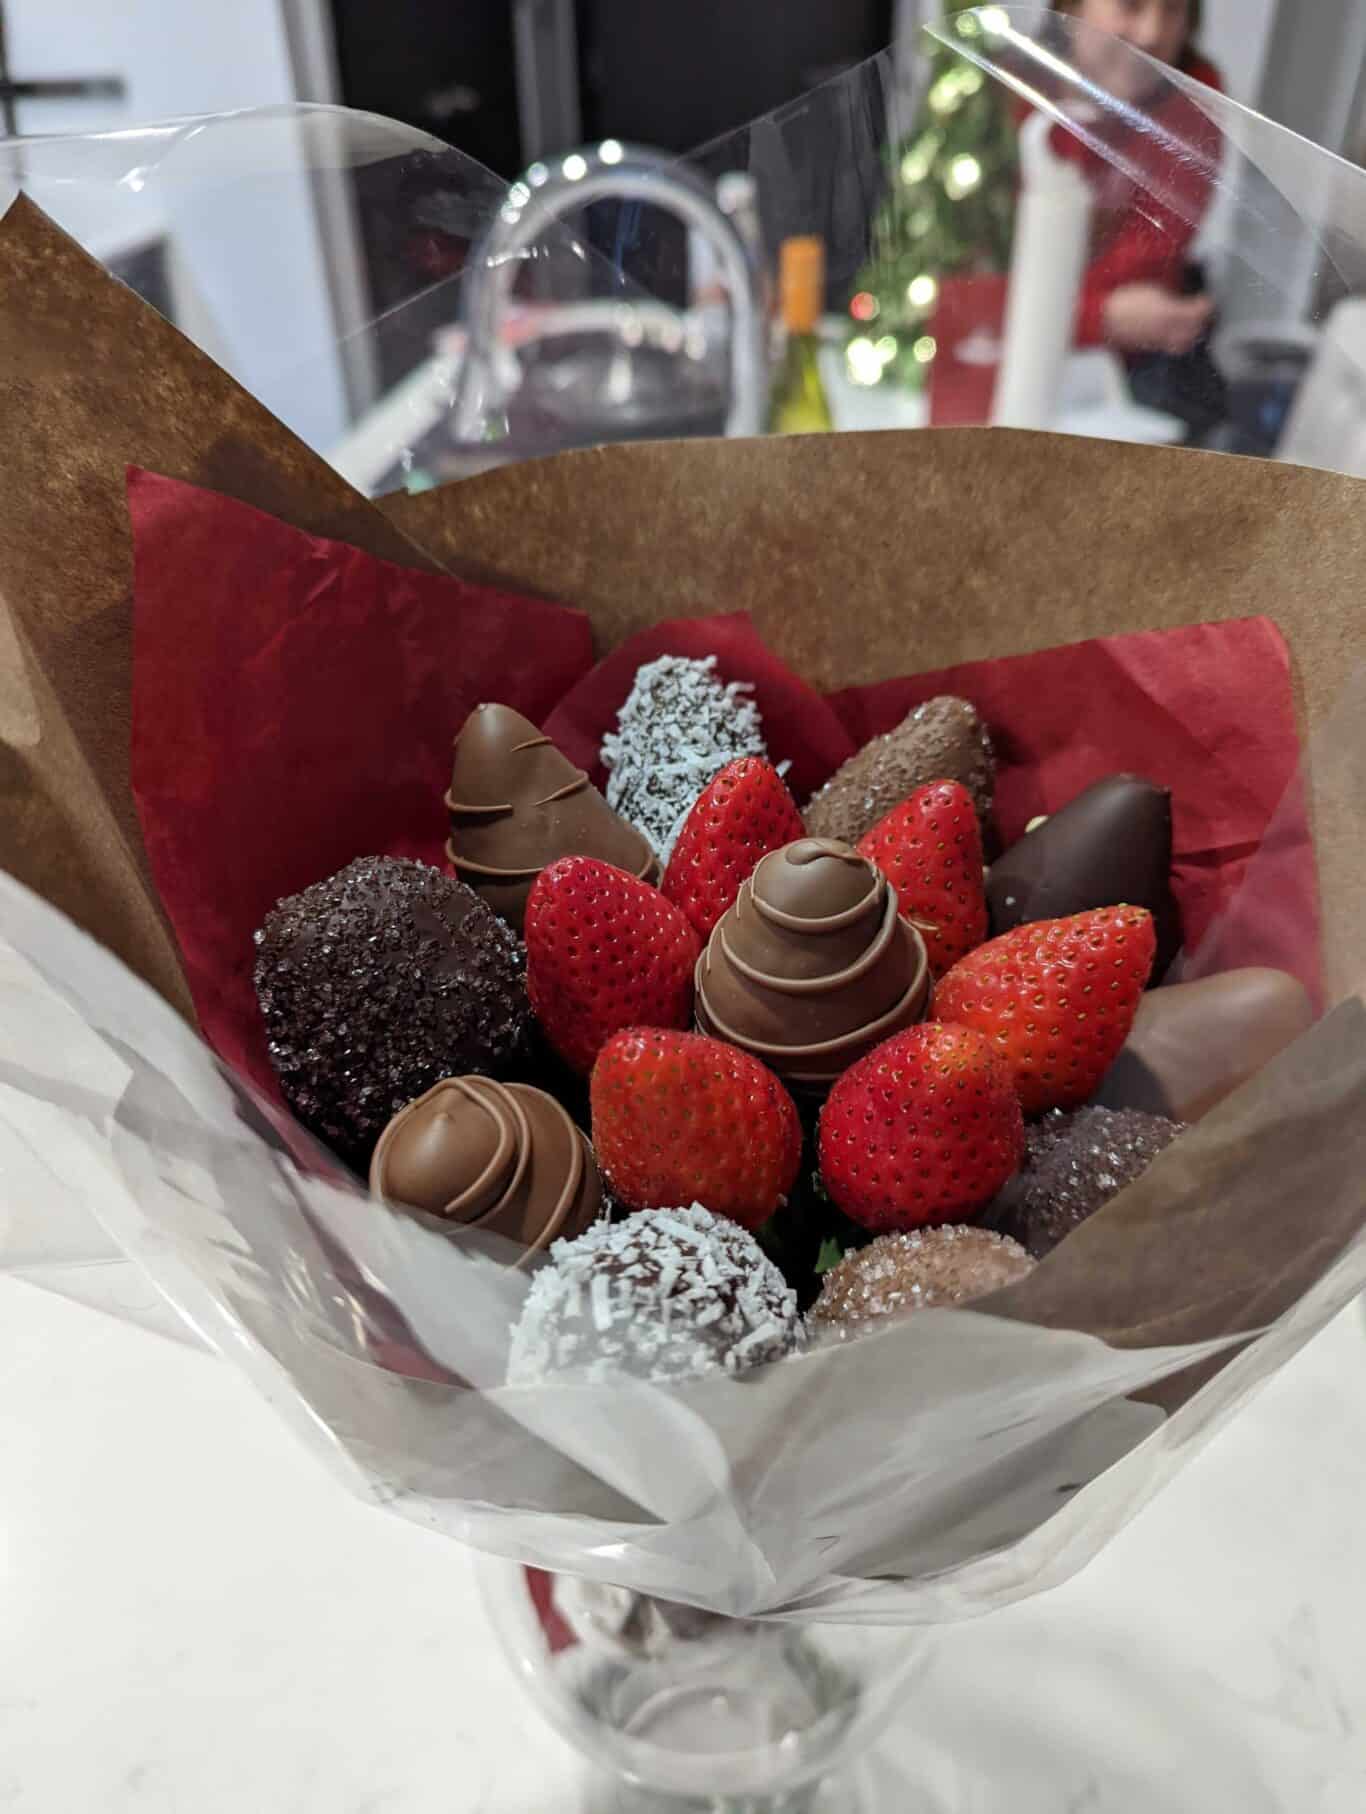 A bouquet of chocolate strawberries, Unito's sixth year work anniversary gift.